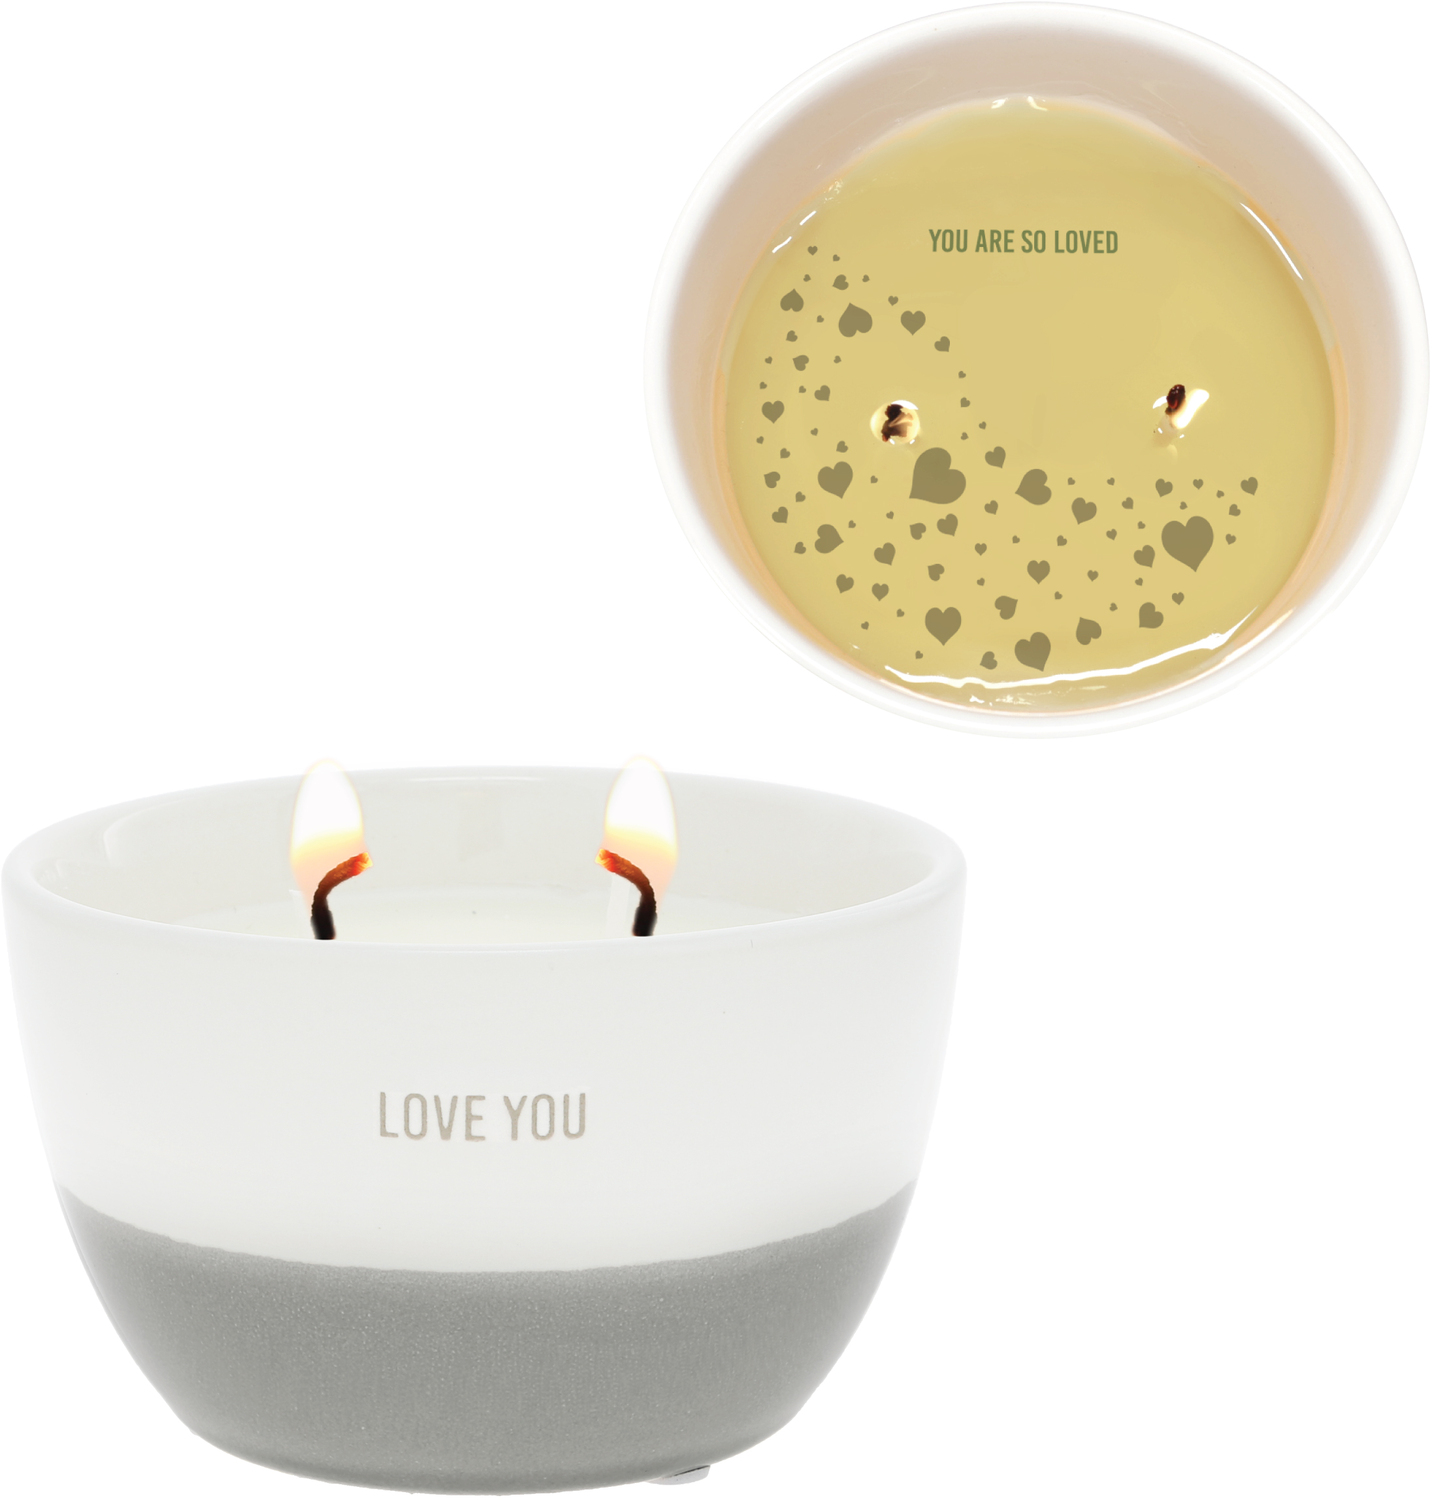 Love You by Love You - Love You - 11 oz - 100% Soy Wax Reveal Double Wick Candle
Scent: Tranquility